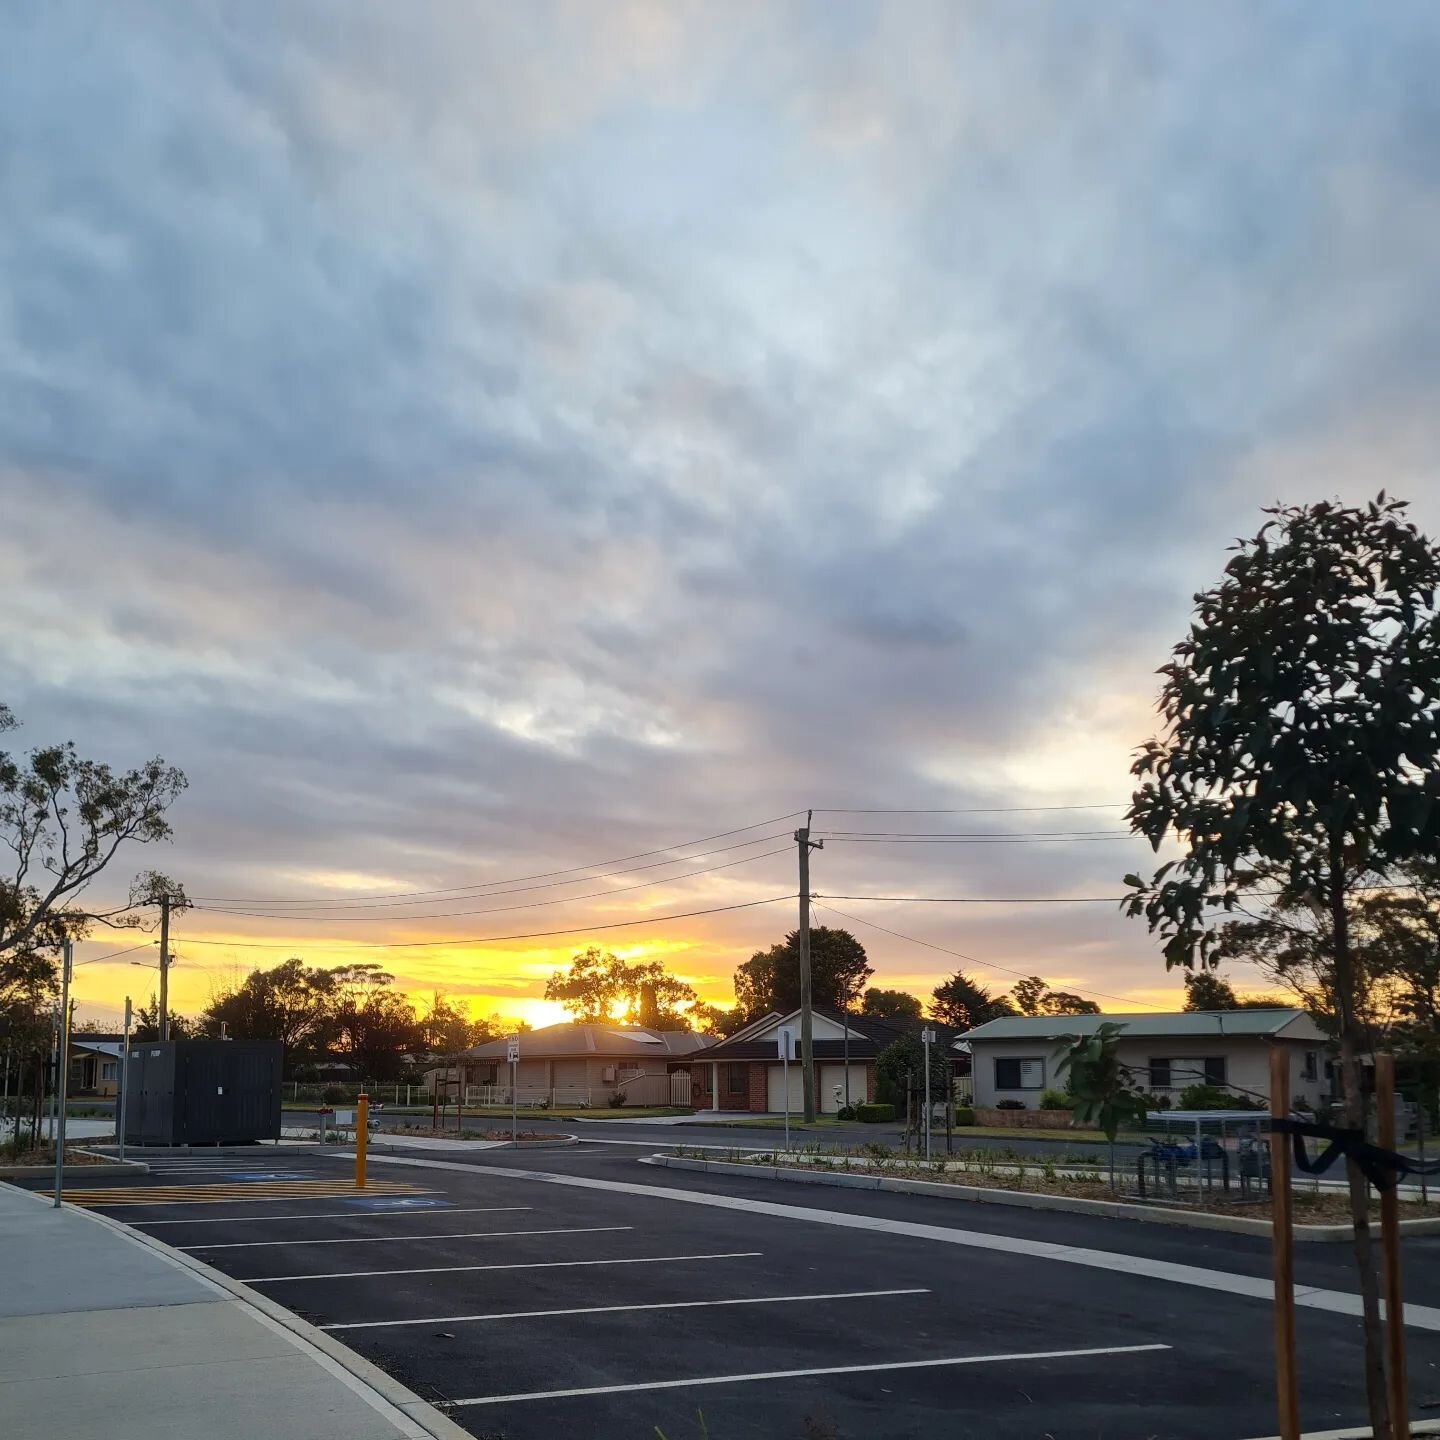 I love where I live! And I'm so fortunate to be able to work from home and still look after my beautiful patients ♡

#Bomaderry #smallbusiness #bomaderrycosmeticinjector #bomaderryinjector #bomaderryinjectables #lovewhereyoulive